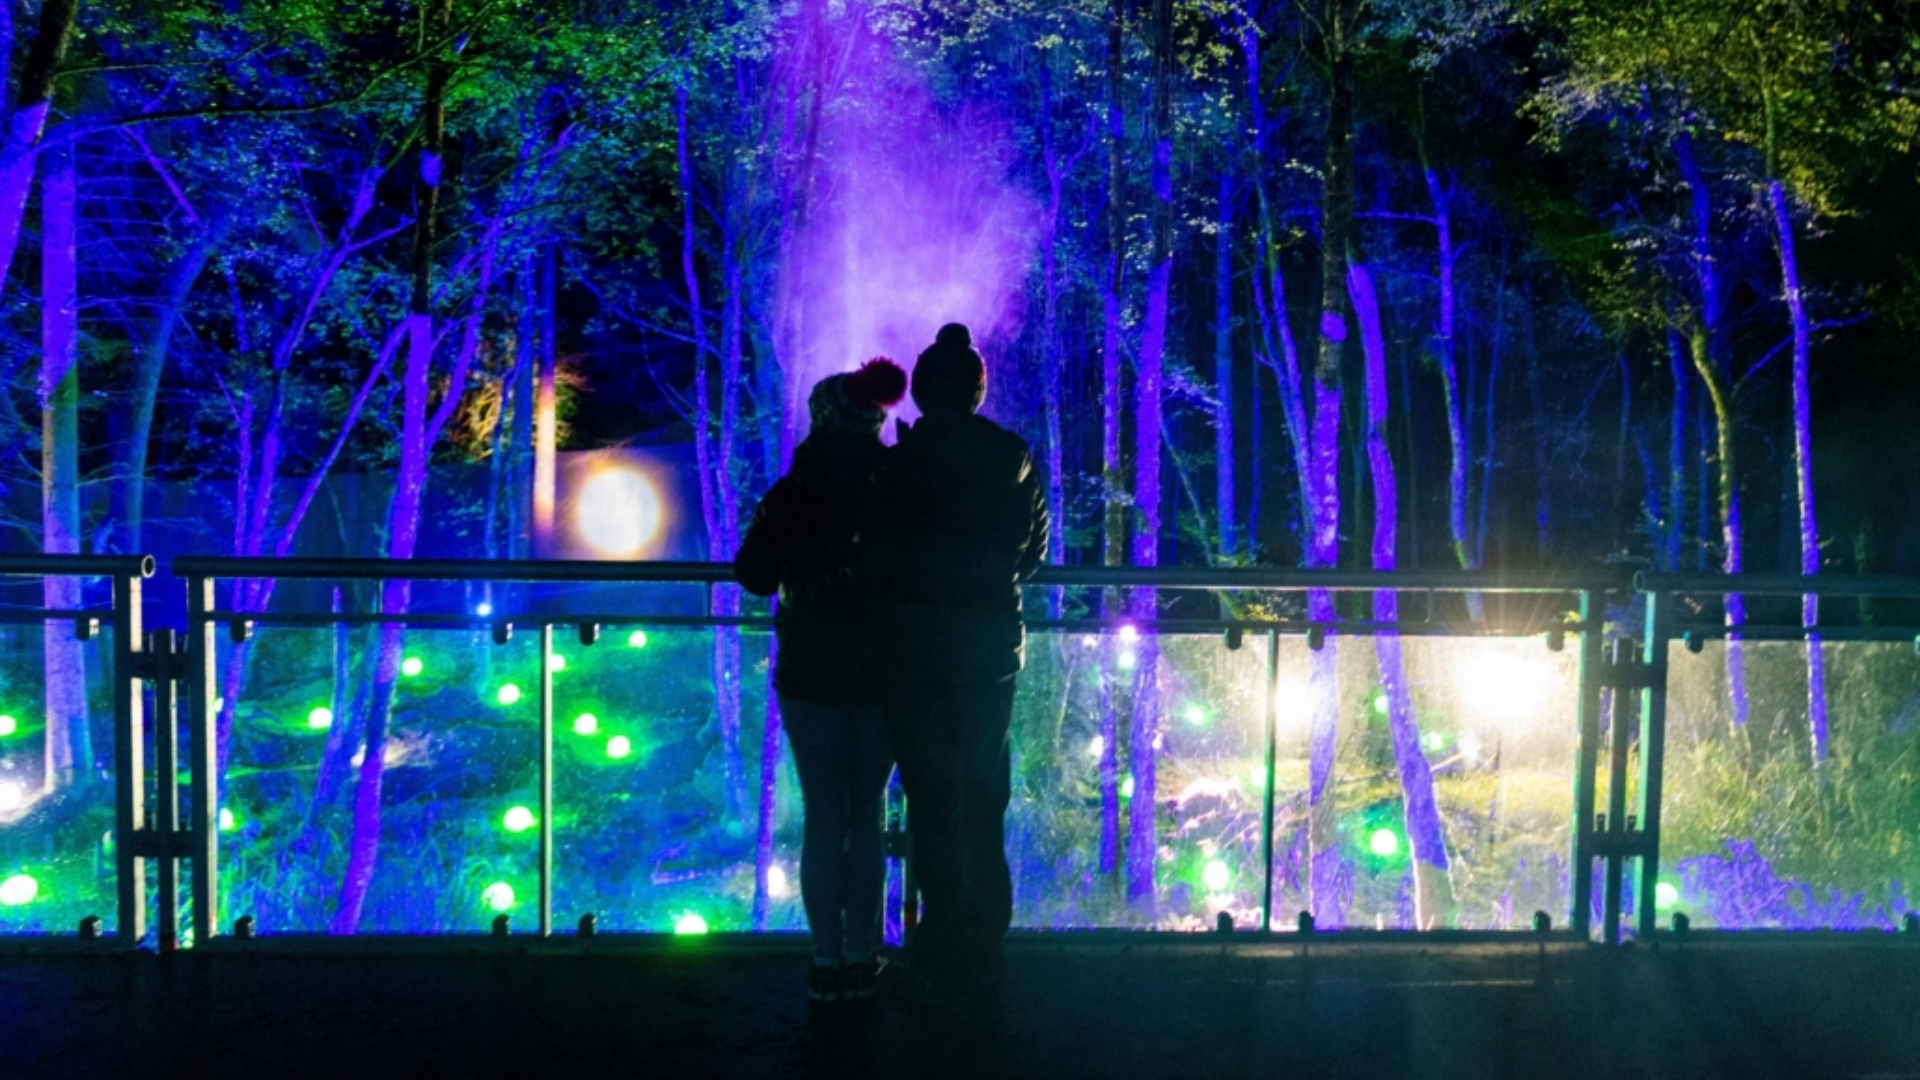 The Enchanted Forest music and light show